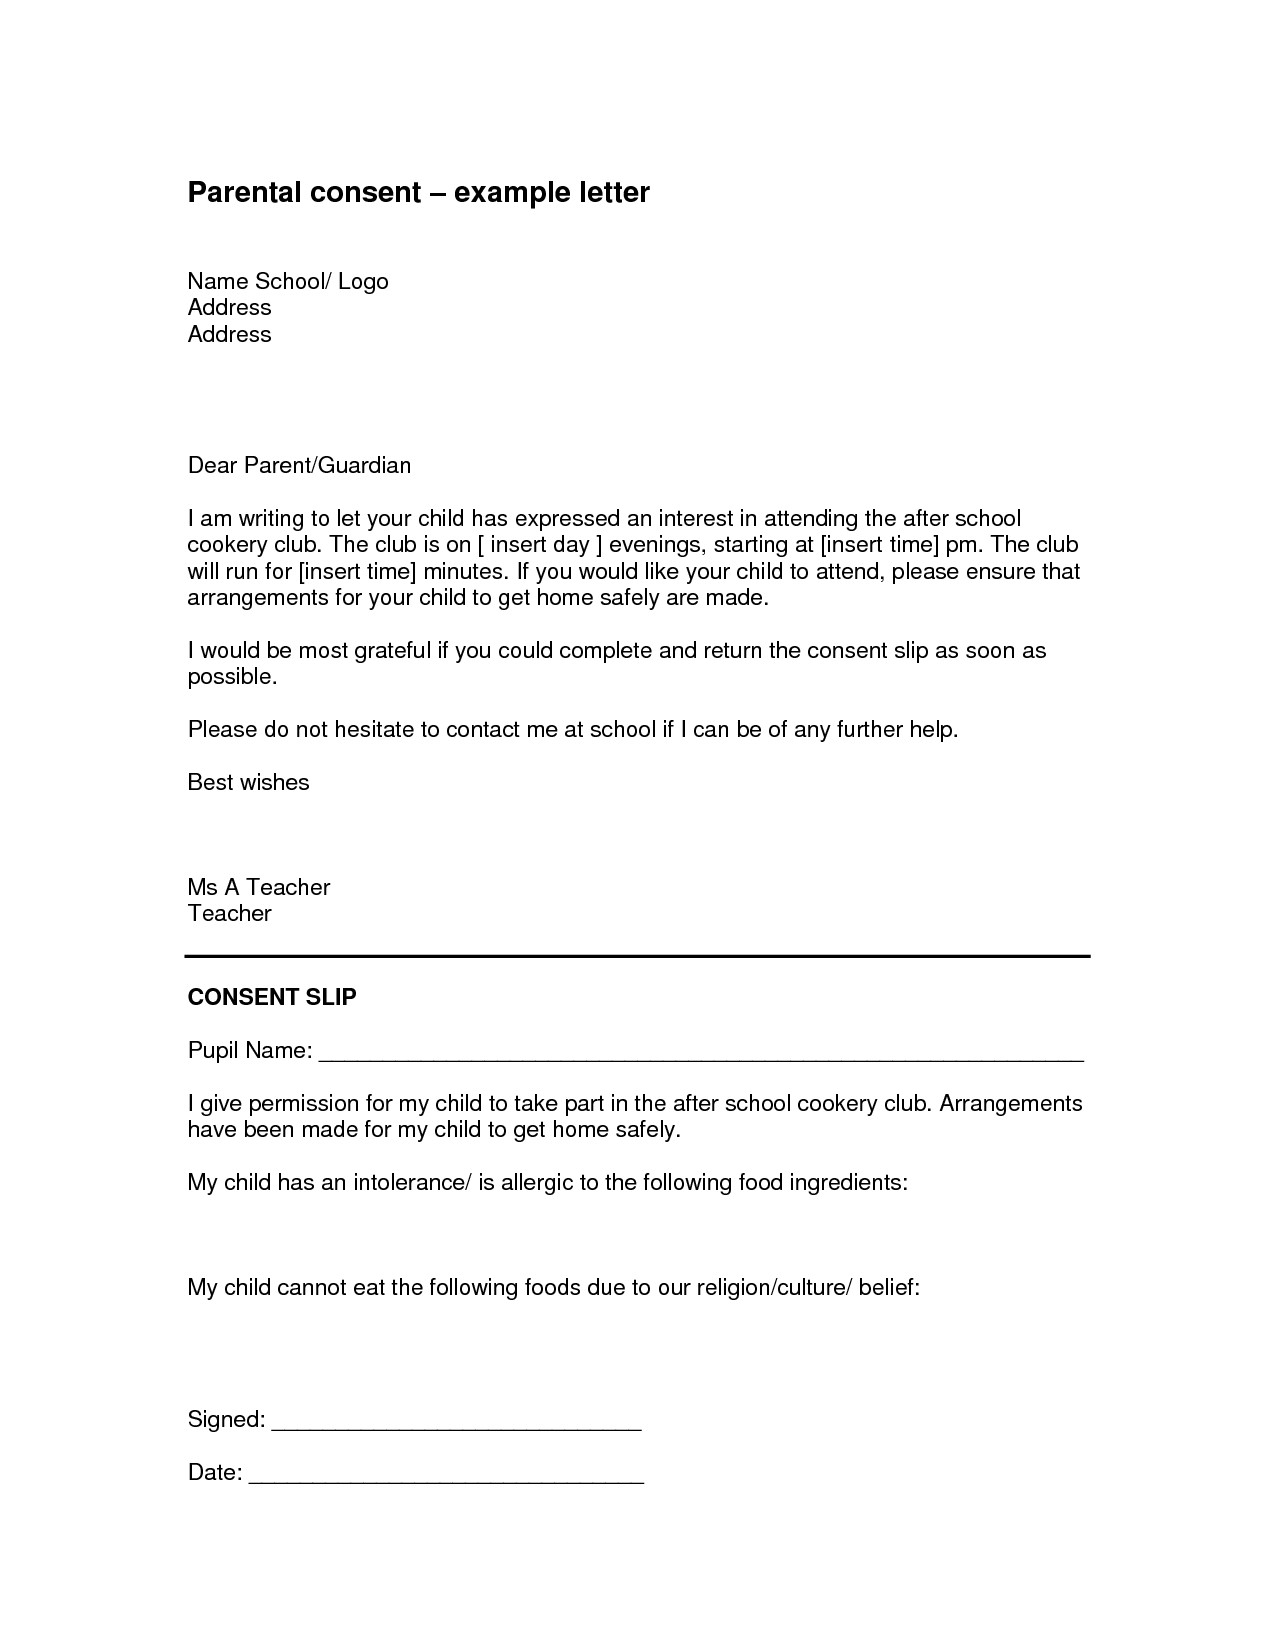 Letters to Parents Template Weekly Letter to Parents Template Collection